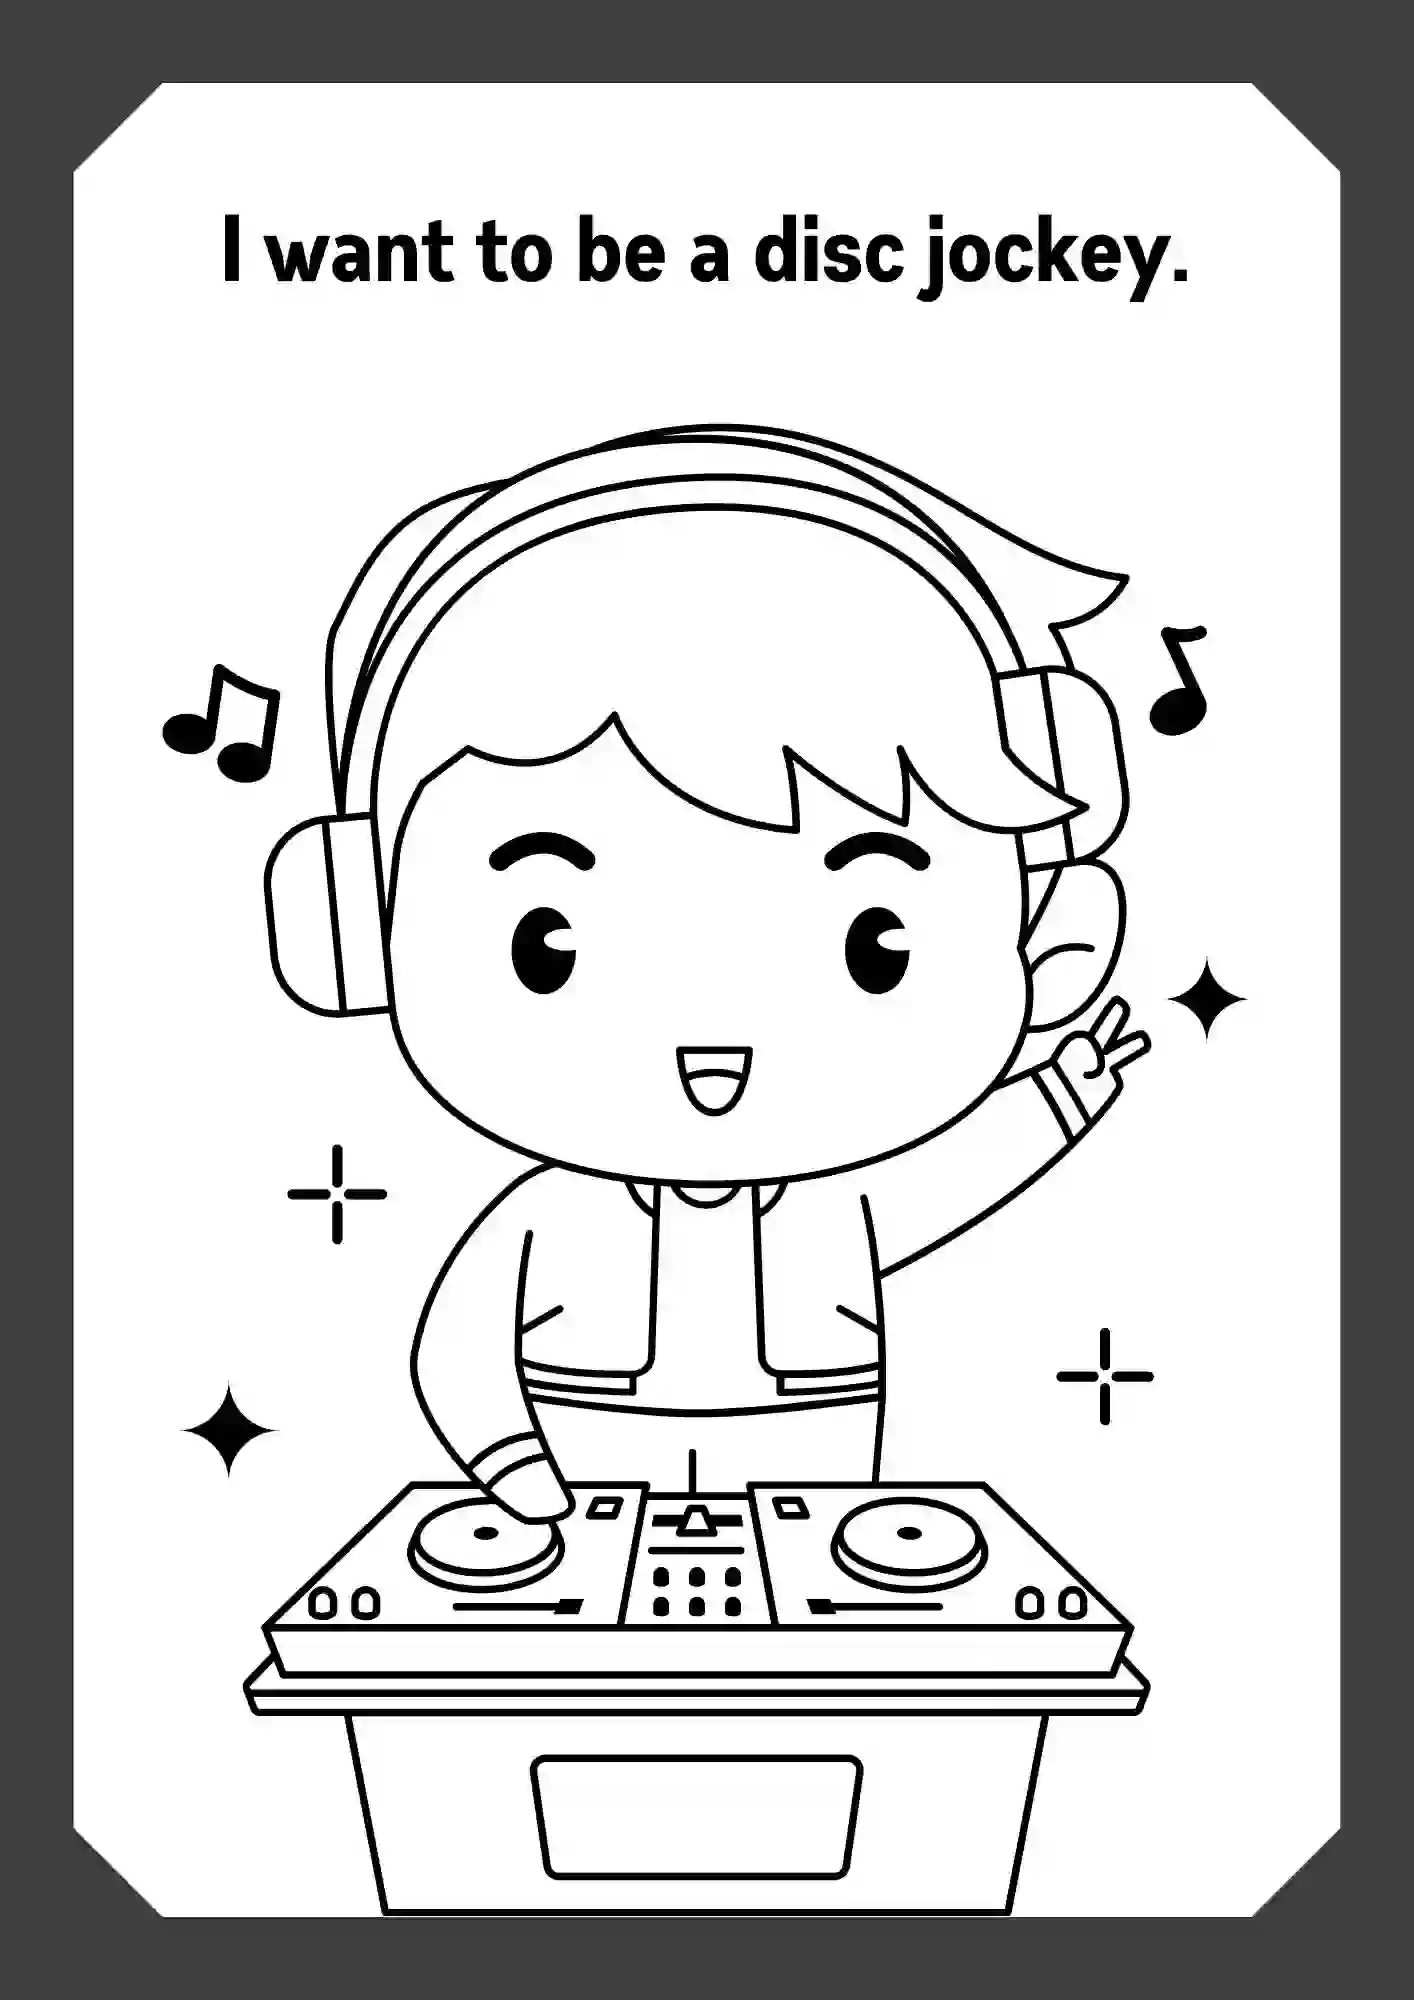 Boys In Different Careers Coloring Worksheets ( disc jockey)